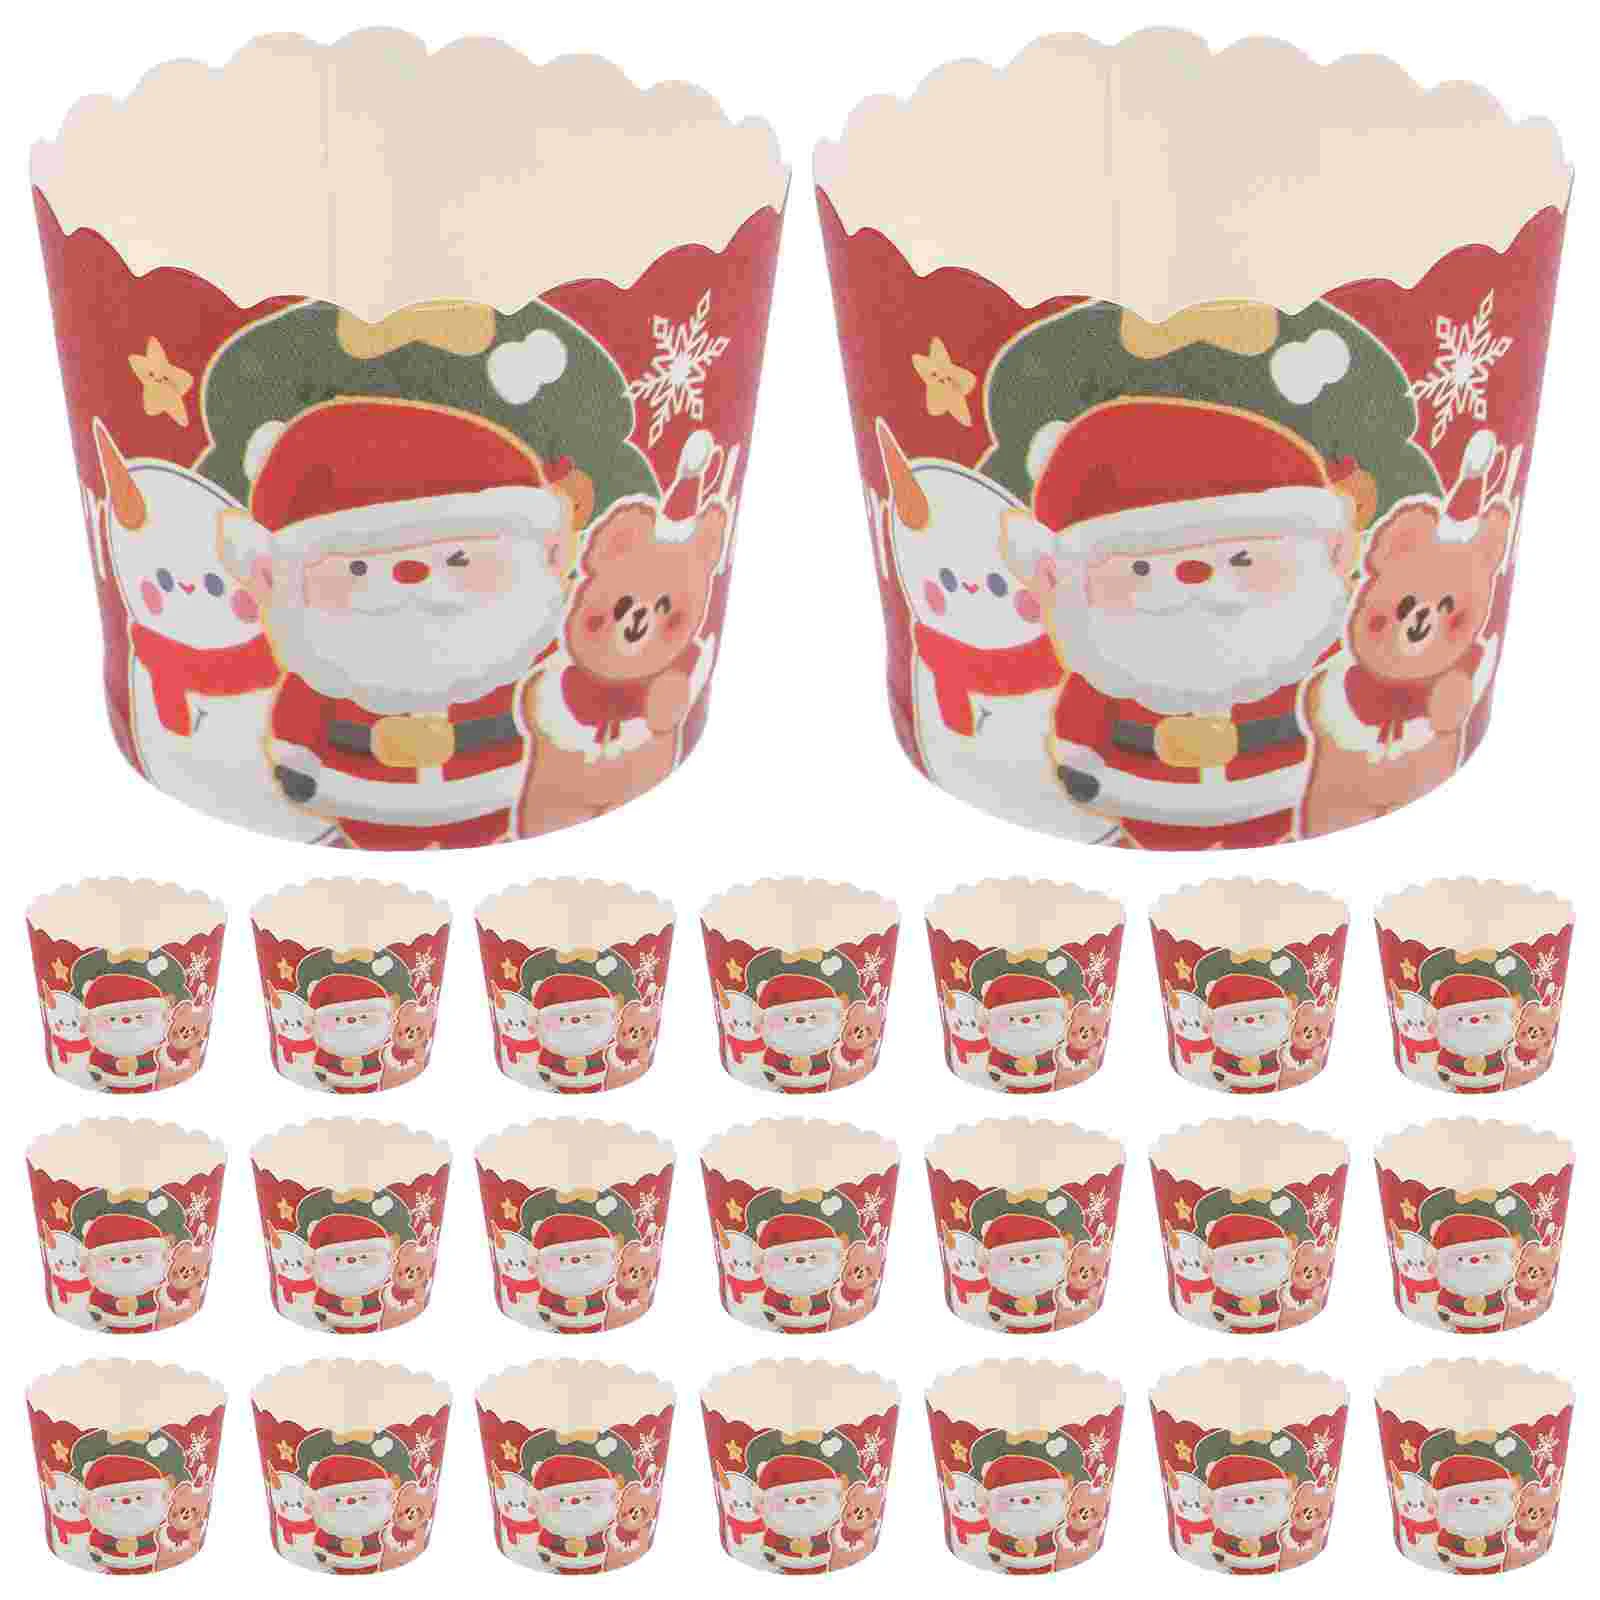 

50Pcs Christmas Themed Cupcake Baking Wrapper Muffin Liners Dessert Baking Cups Xmas Paper Baking Cups